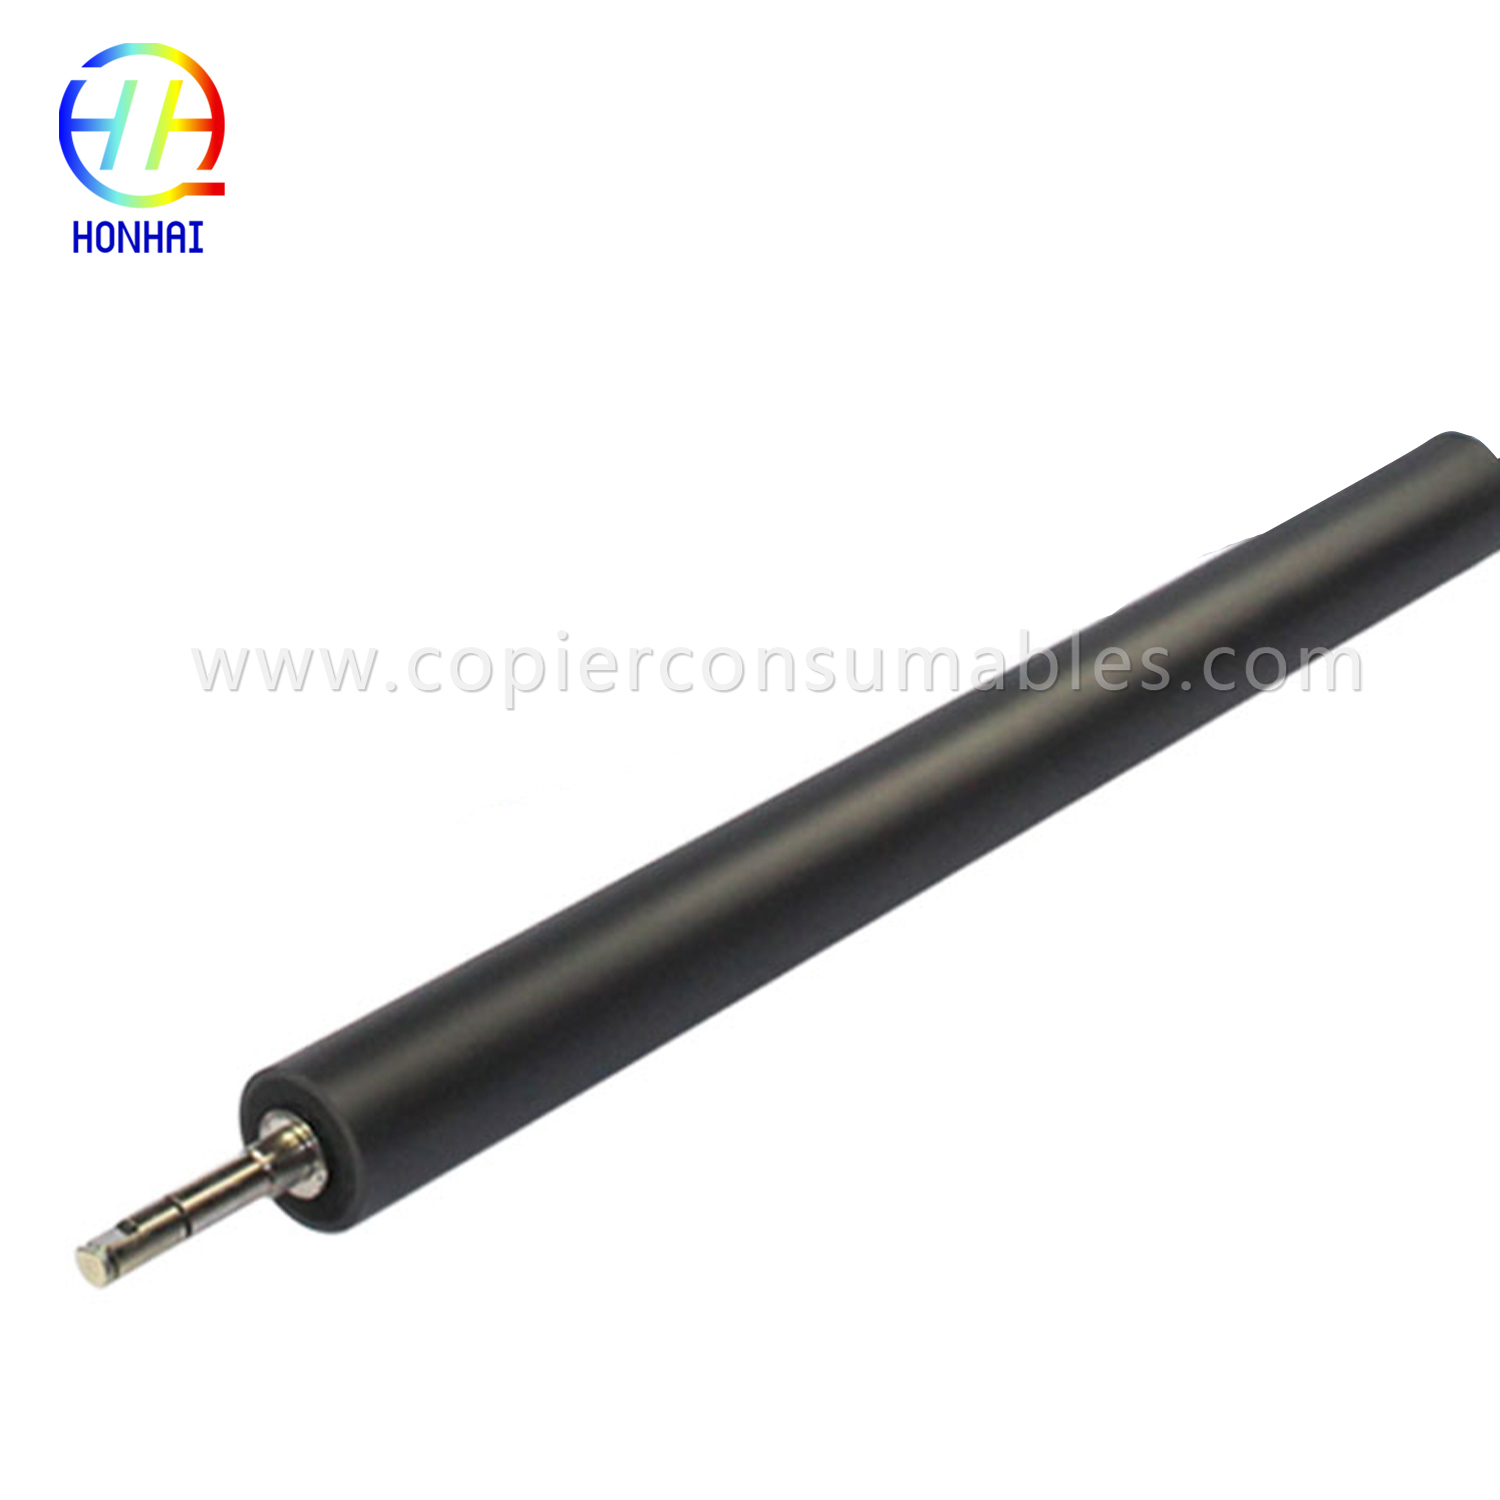 2ND Transfer Roller for Docucentre C6550 6500 242 252 拷贝